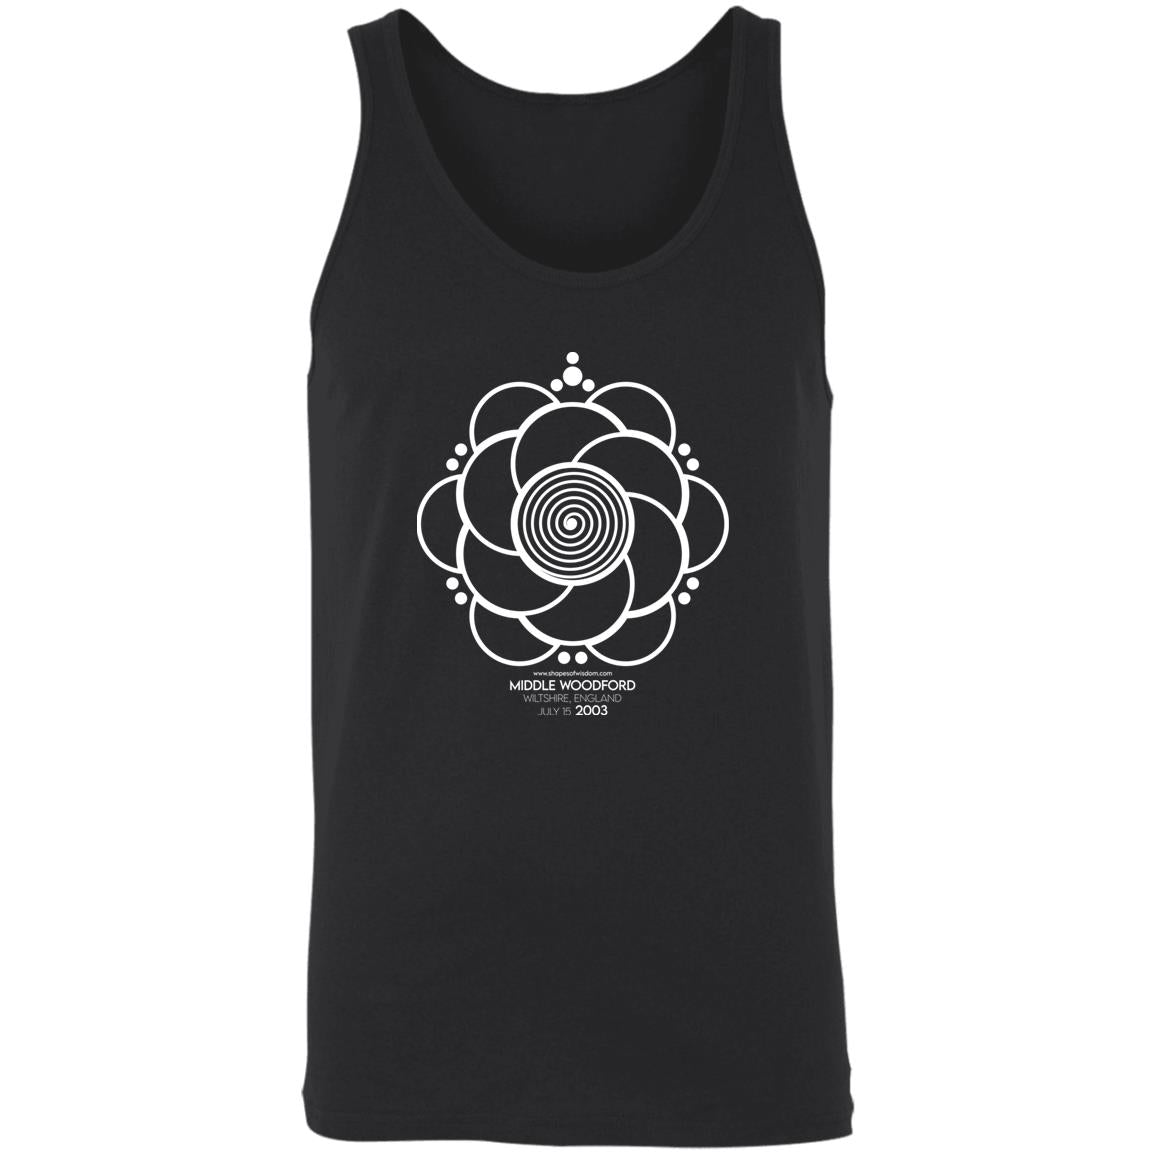 Crop Circle Tank Top - Middle Woodford